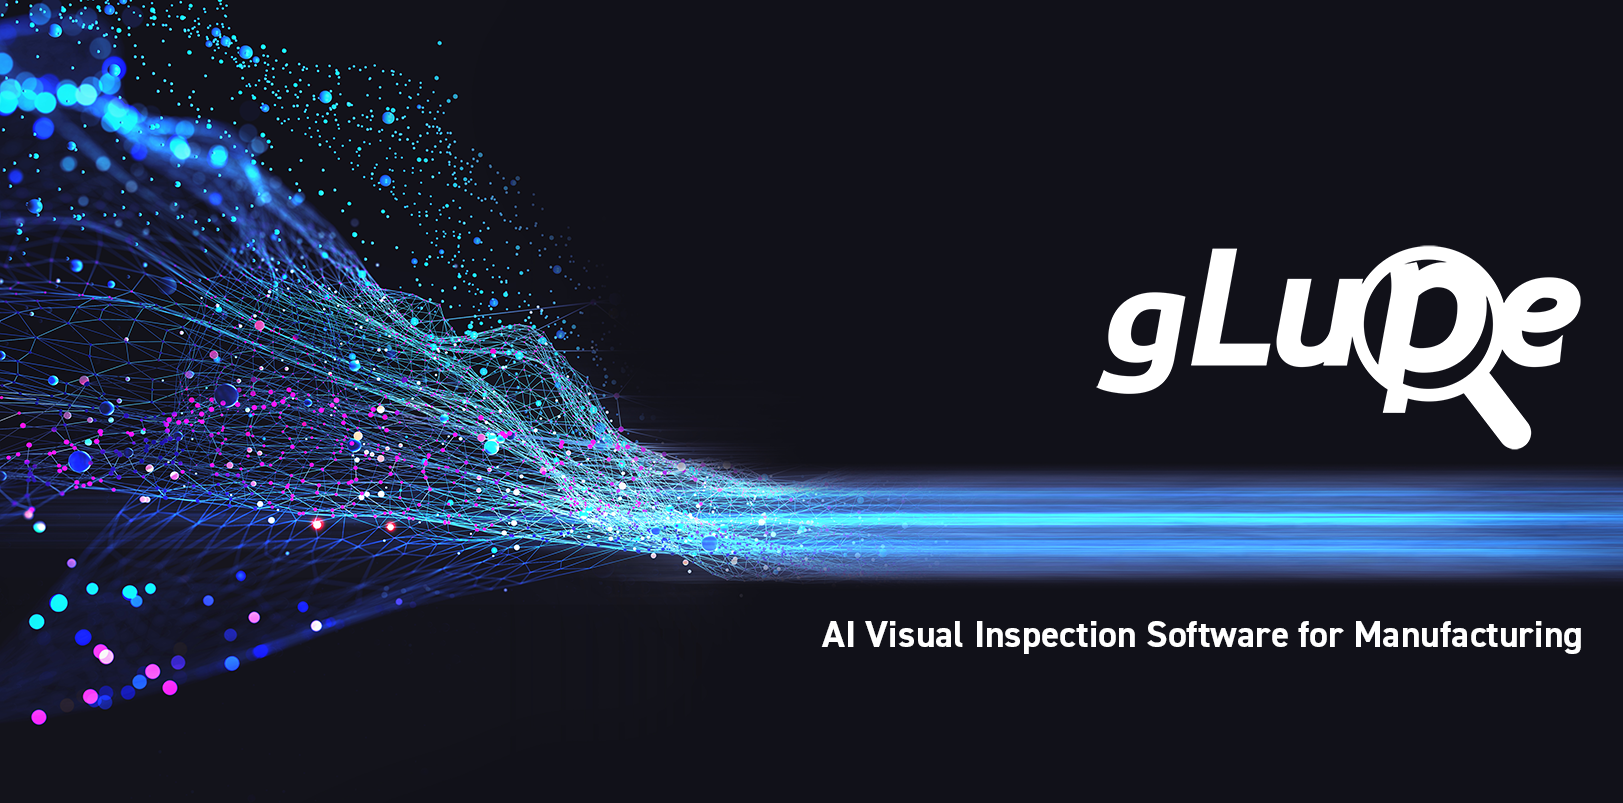 AI Visual Inspection Software for Manufacturing gLupe